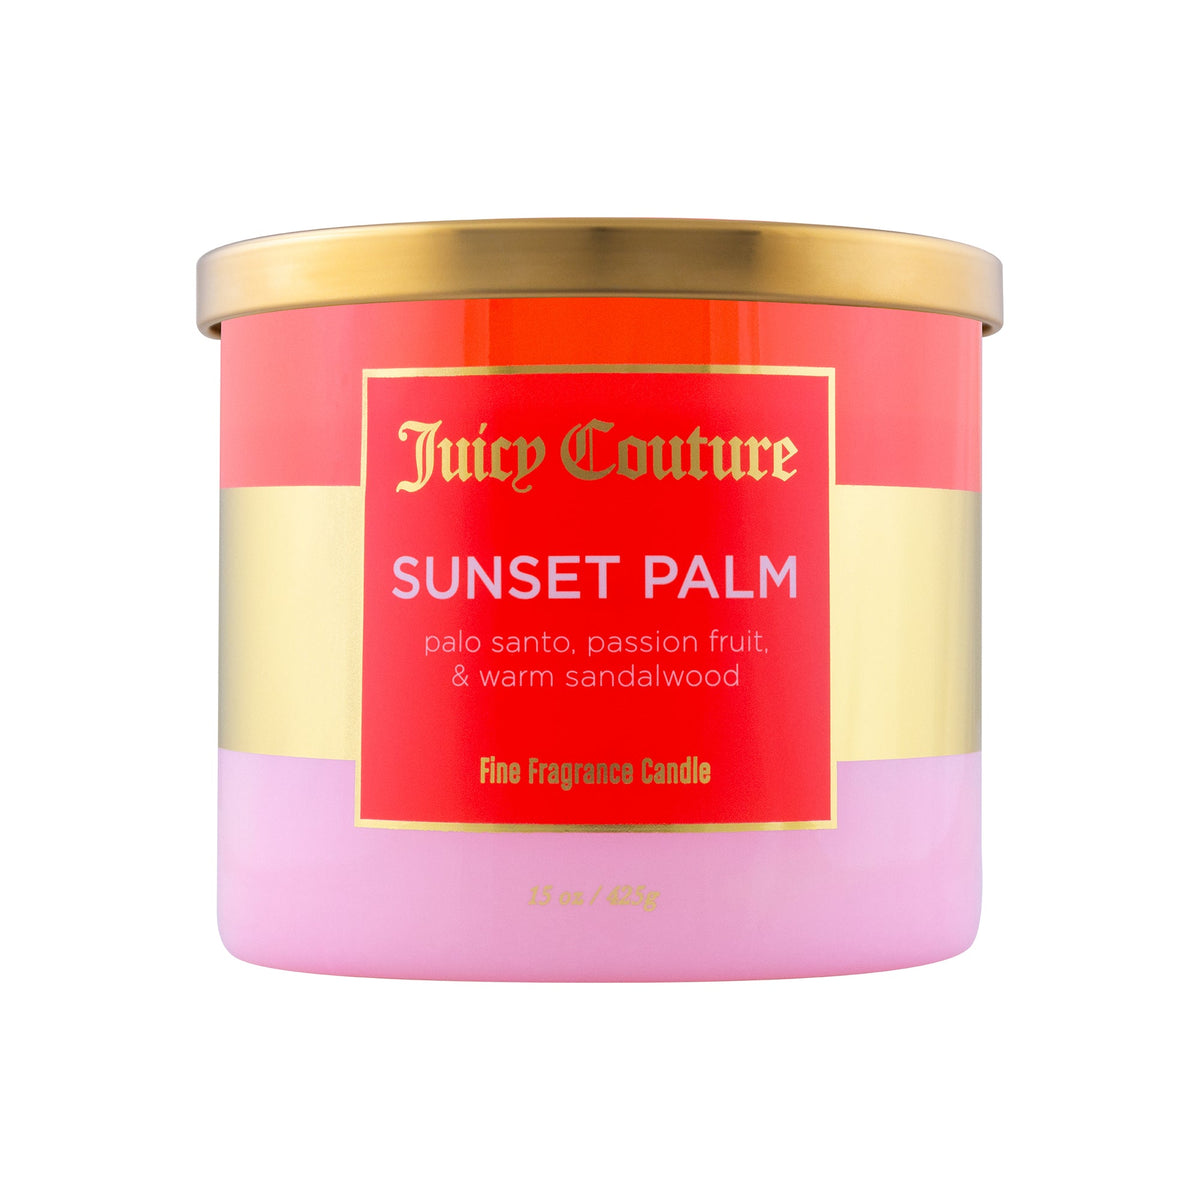 Juicy Couture Sunset Palm Candle